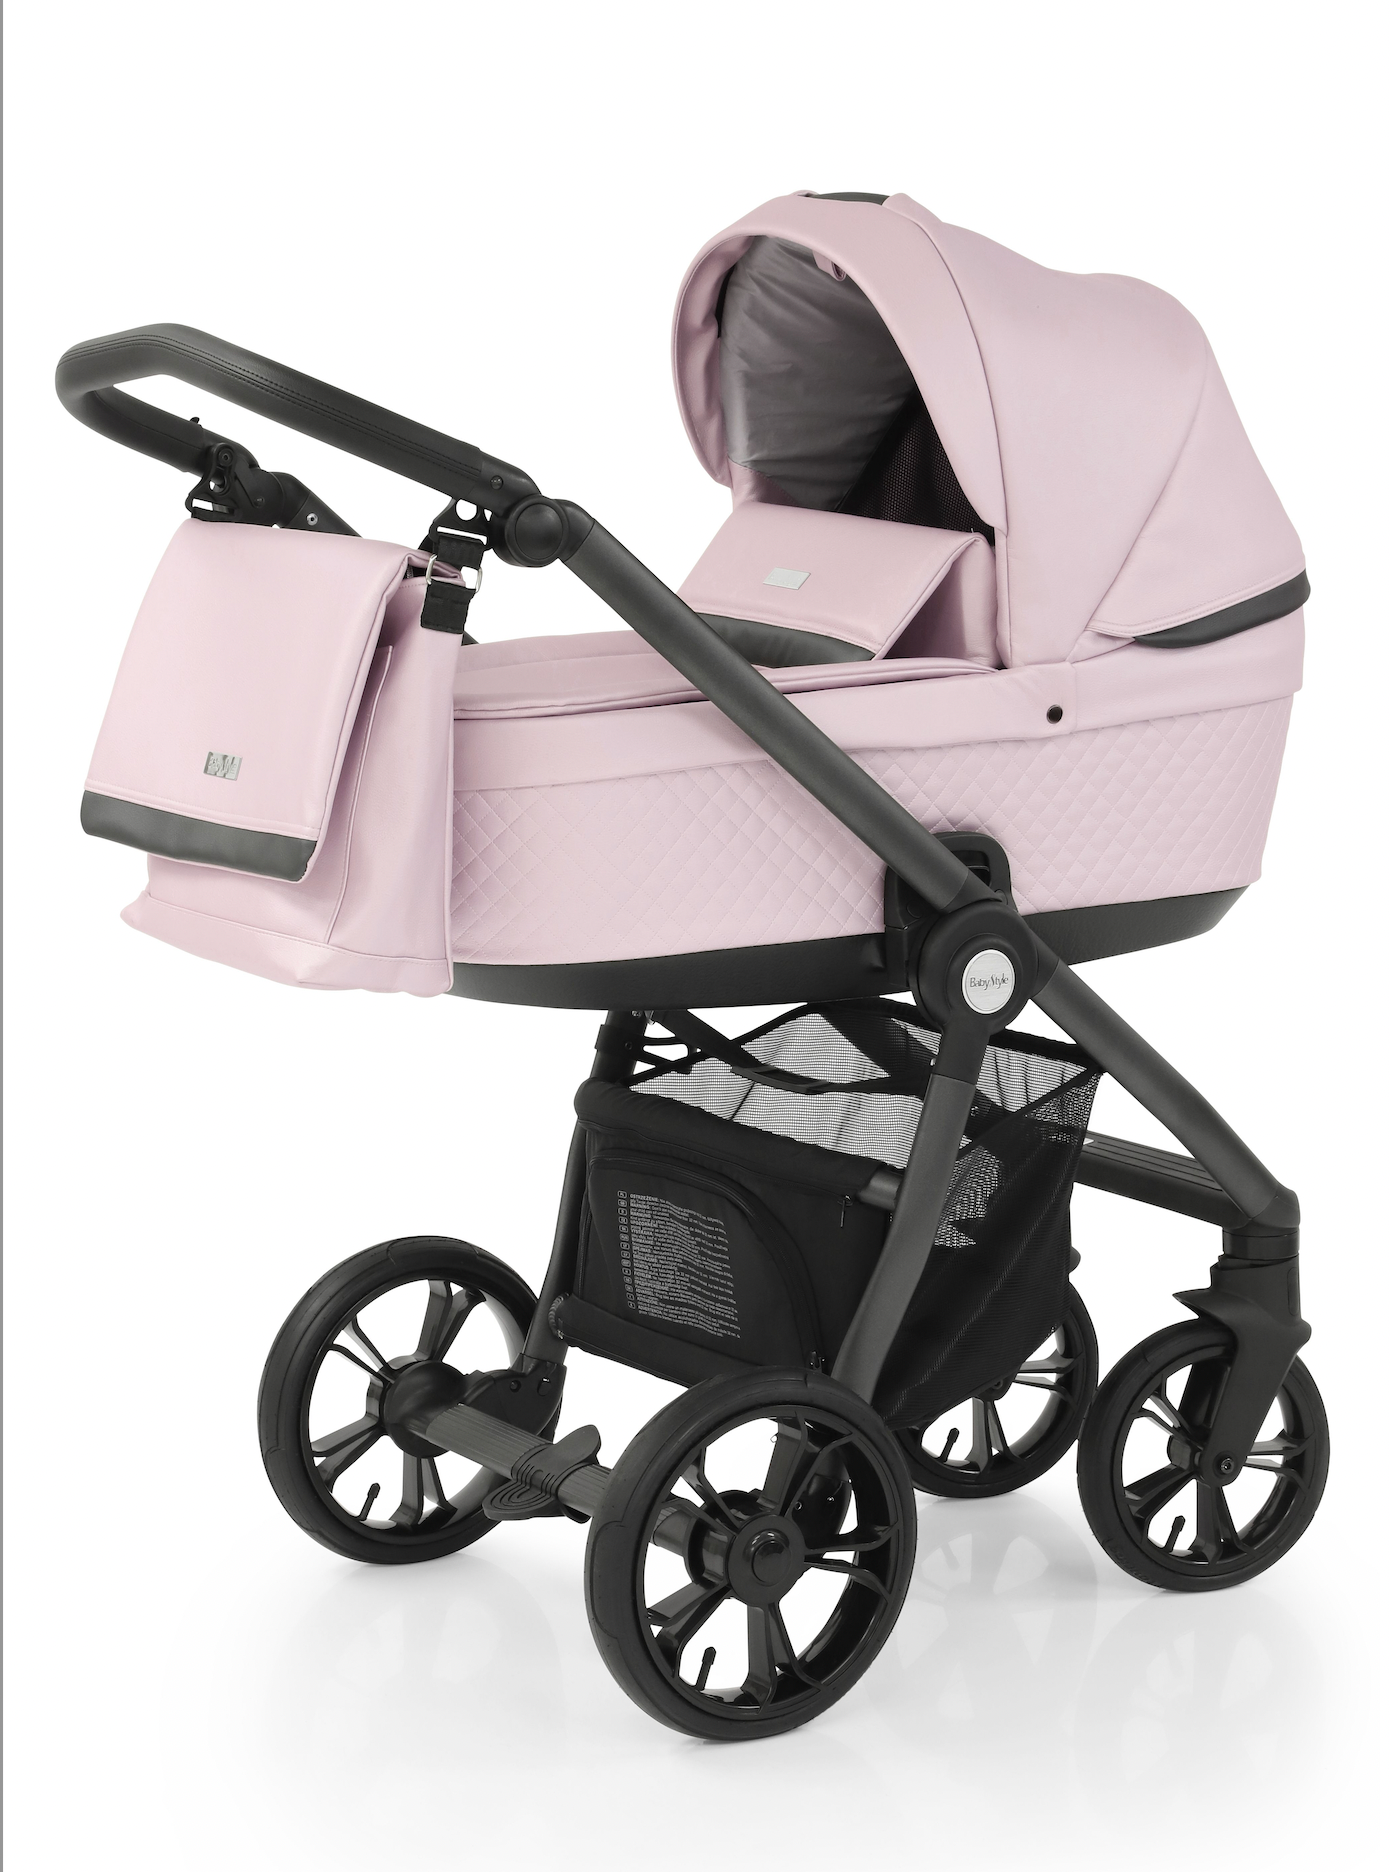 BabyStyle Prestige Travel System - Active Chassis